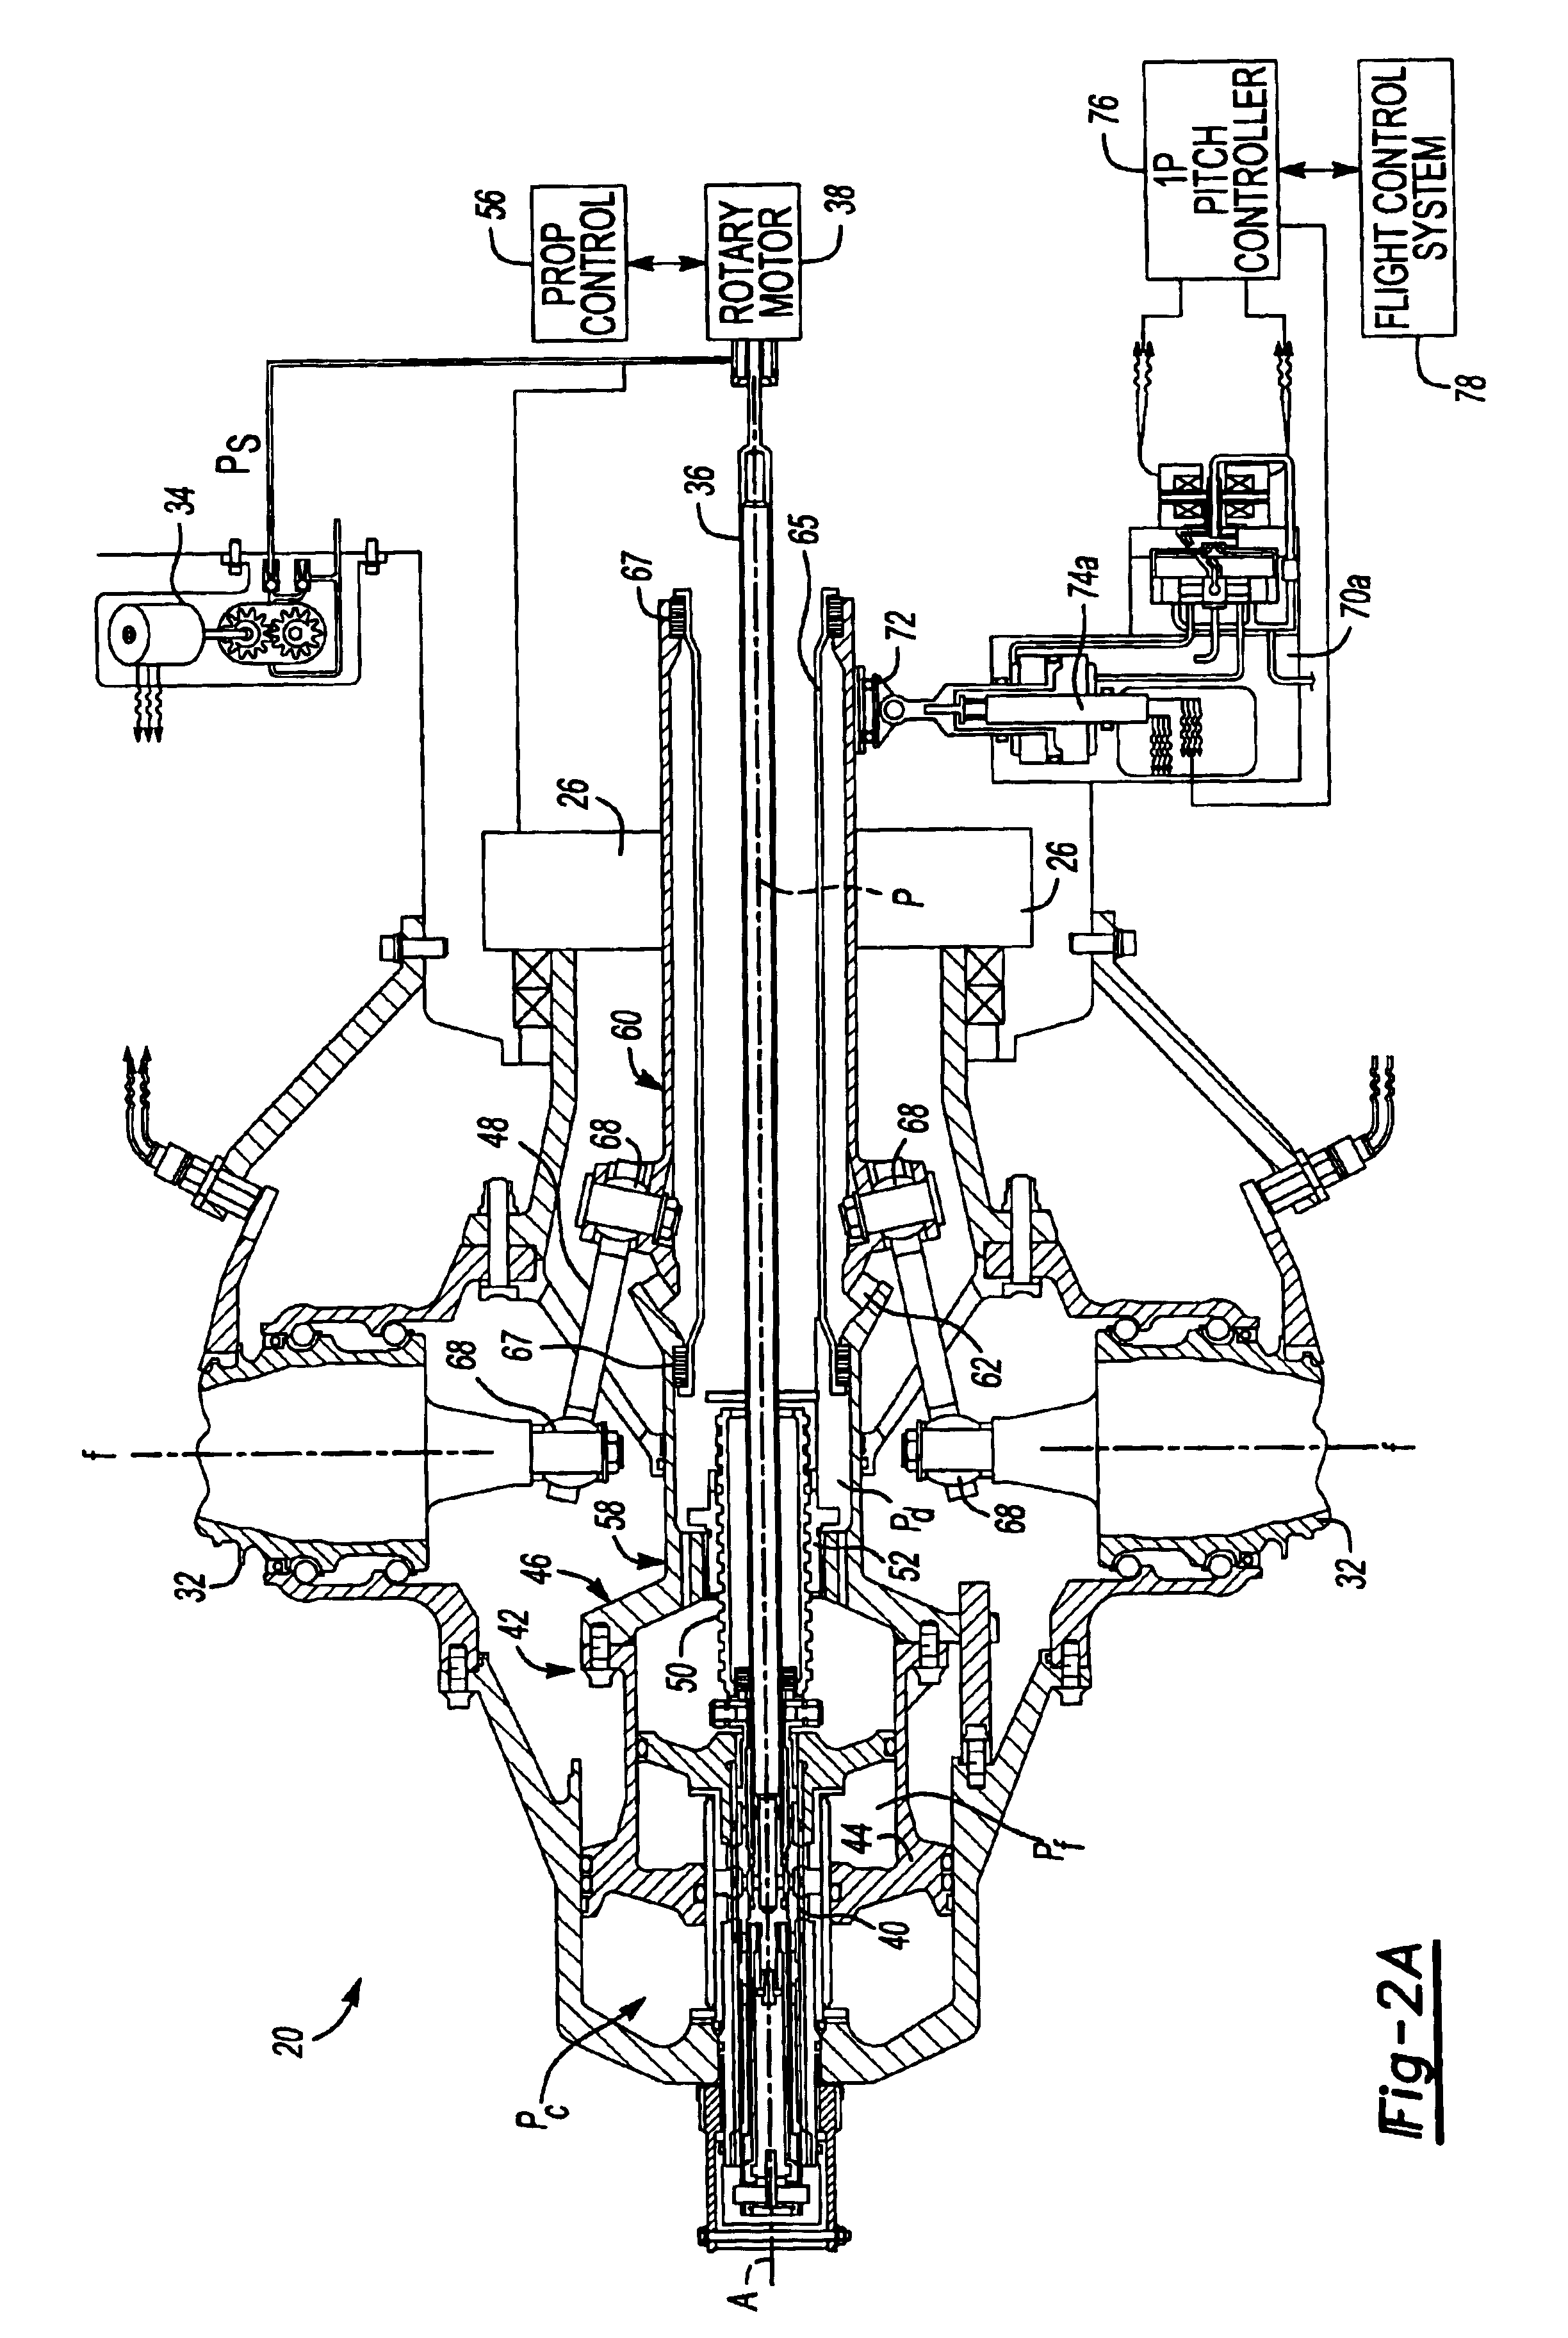 Cyclic actuation system for a controllable pitch propeller and a method of providing aircraft control therewith